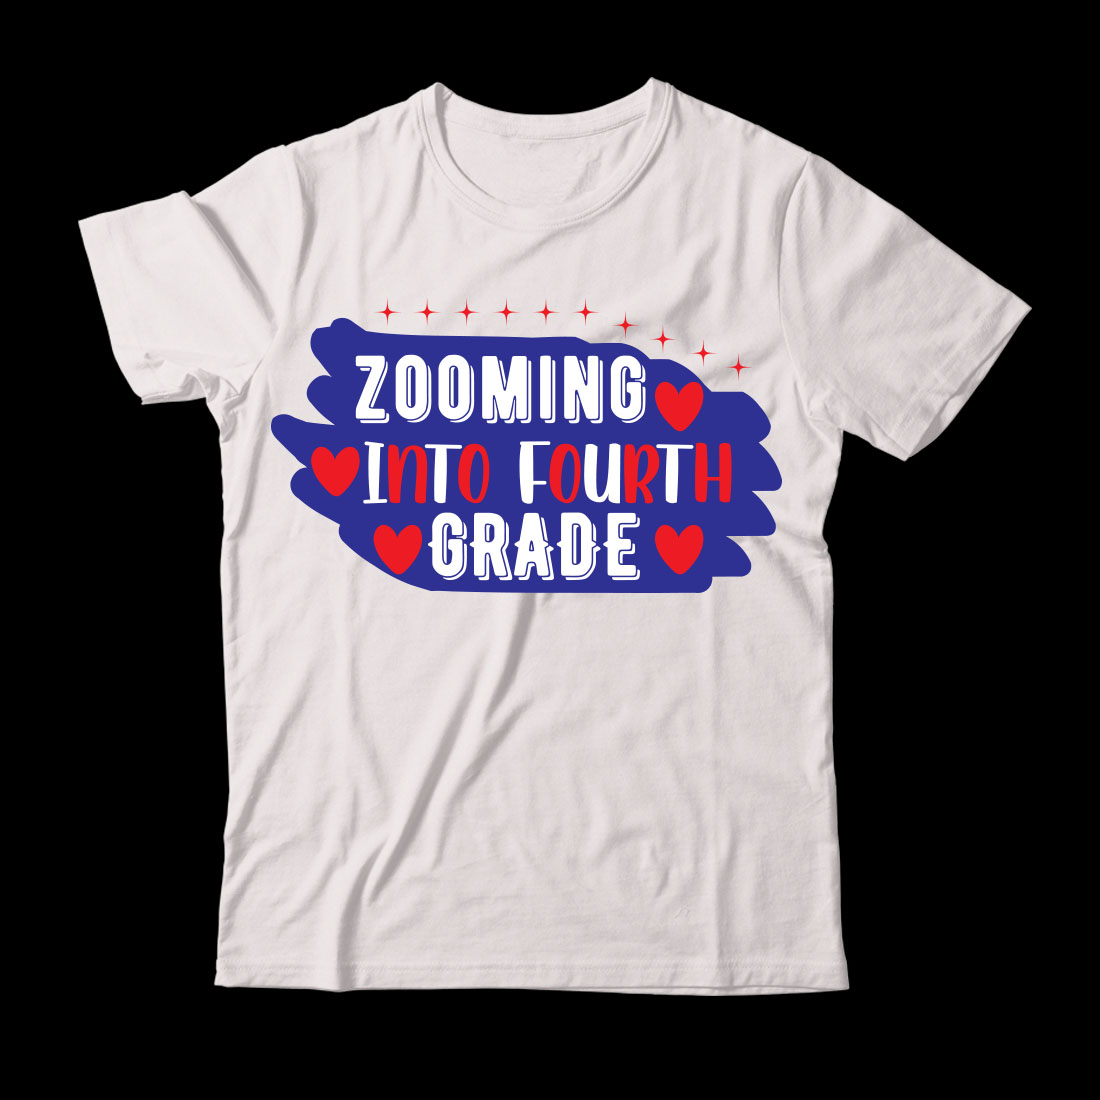 White t - shirt that says zooming into fourth grade.